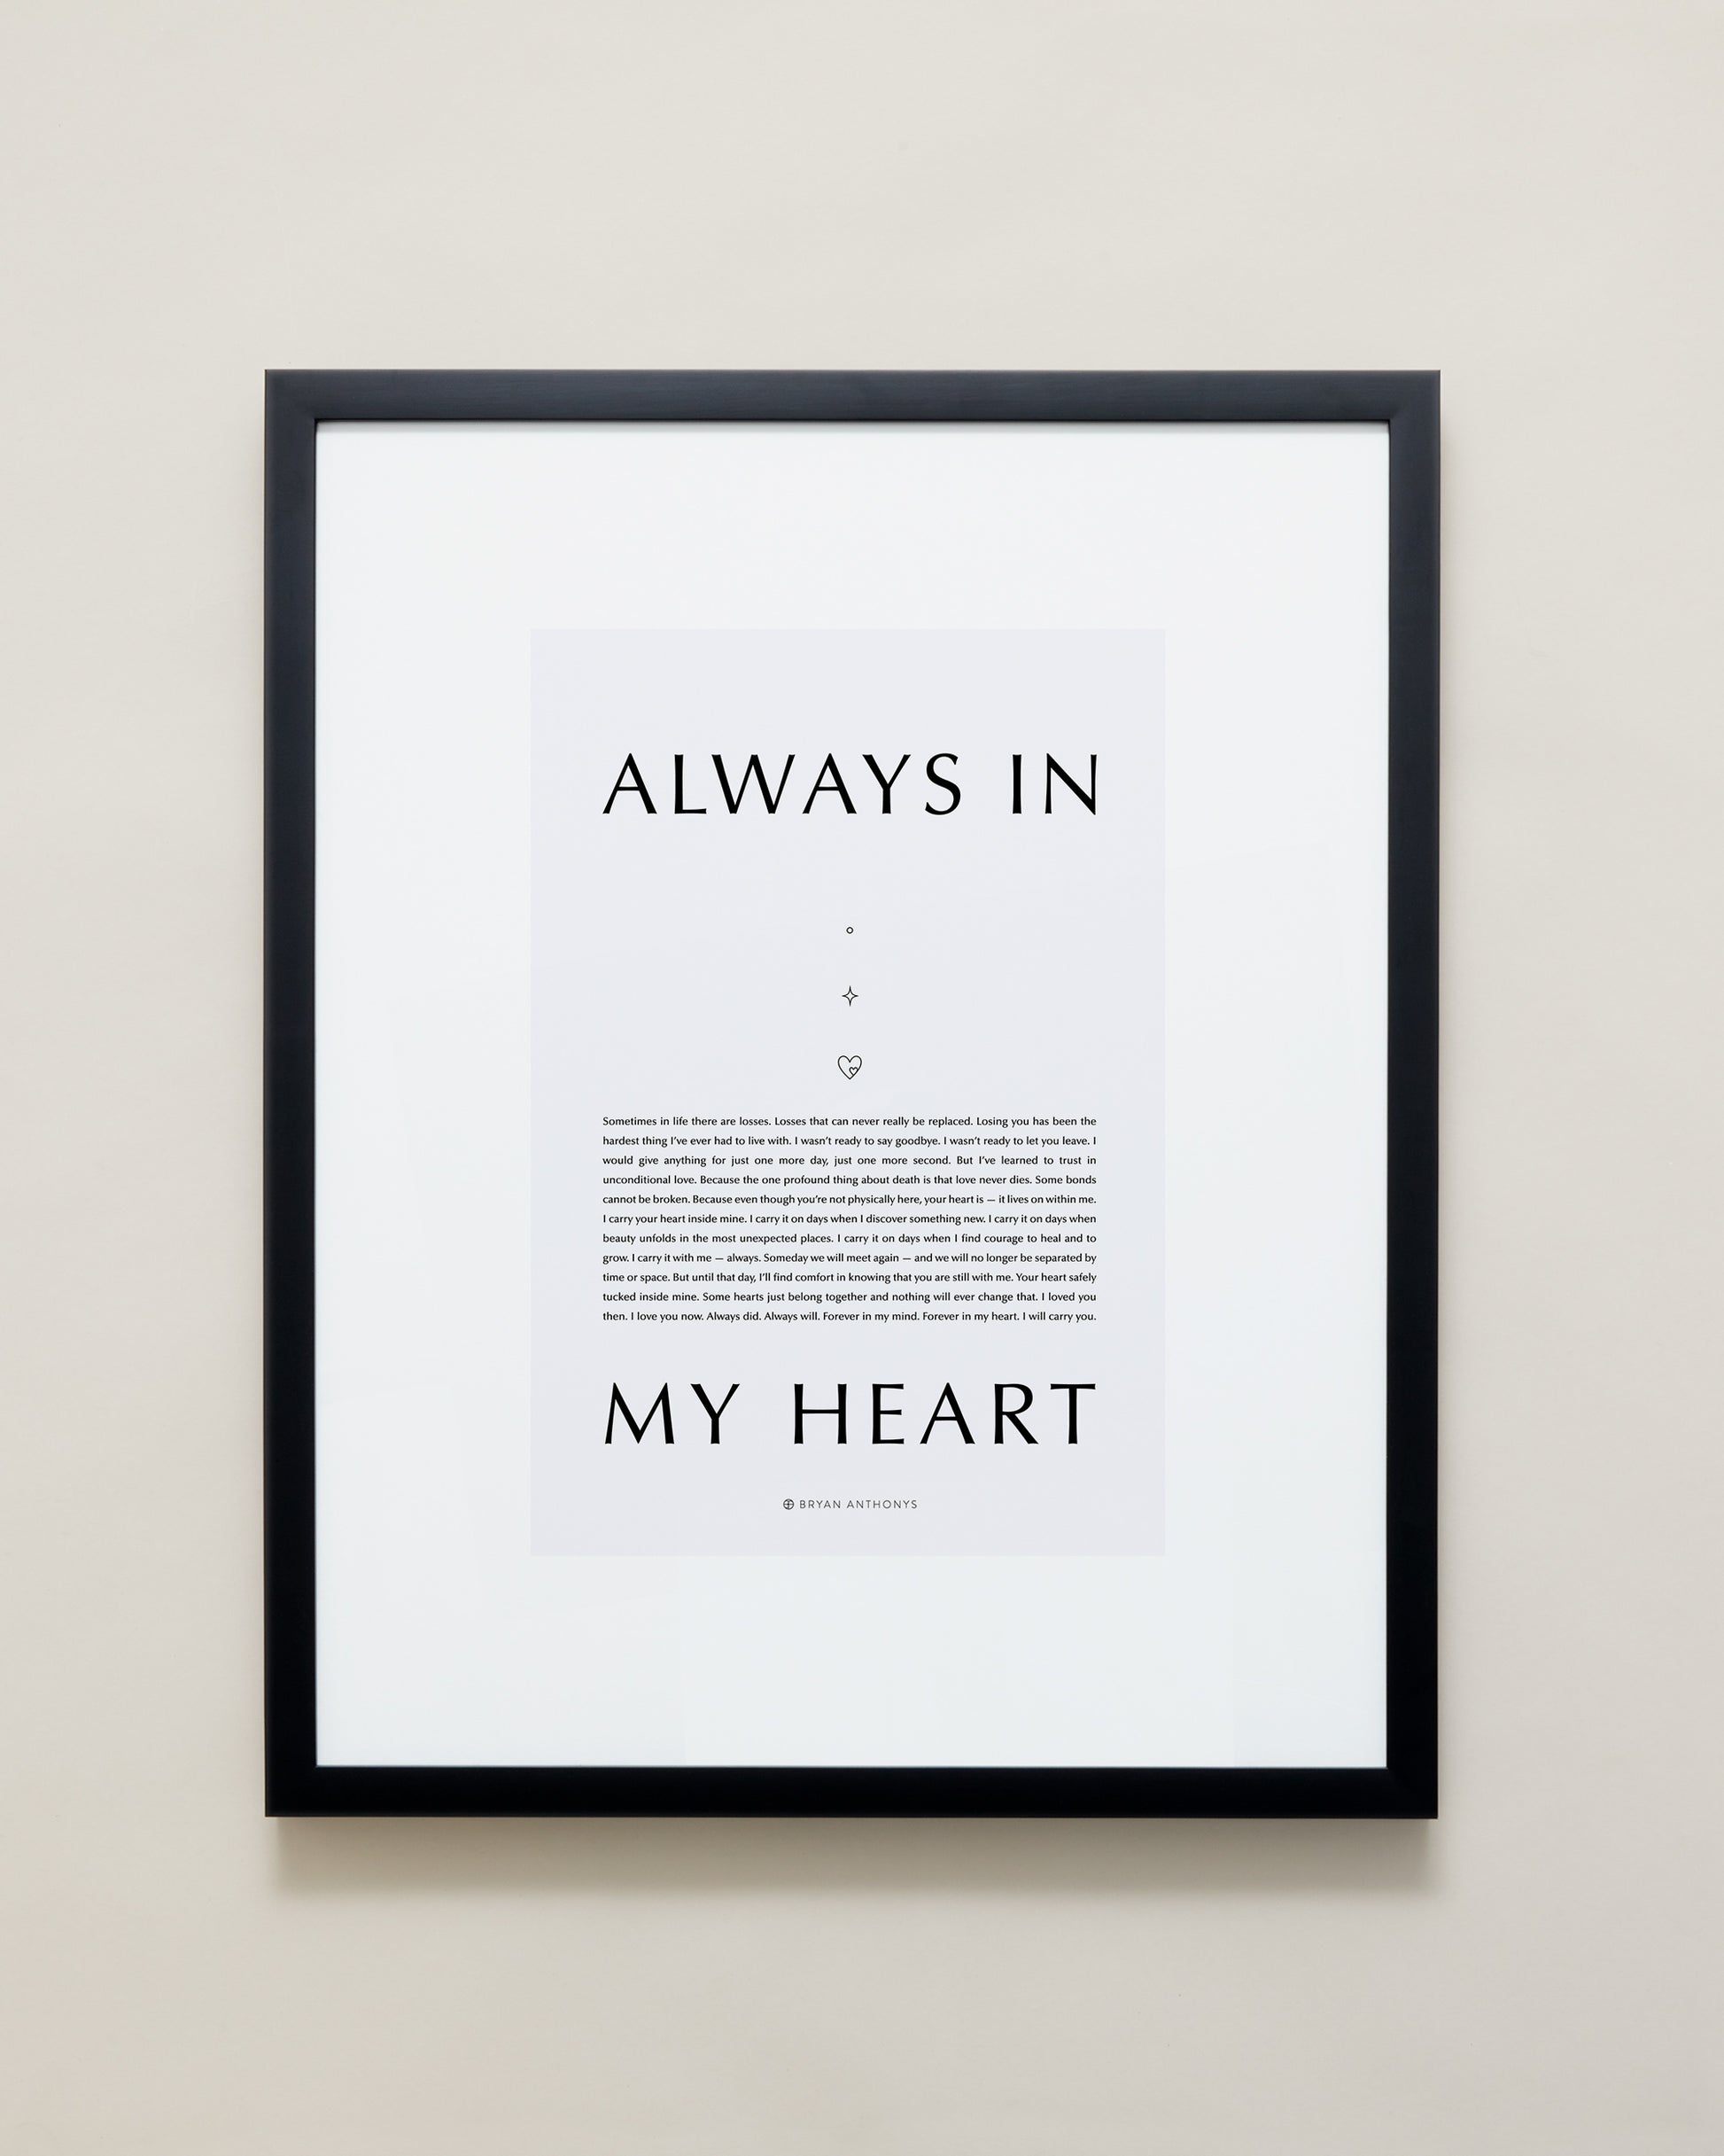 Bryan Anthonys Home Decor Purposeful Prints Always In My Heart Iconic Framed Print Gray Art With Black Frame 16x20